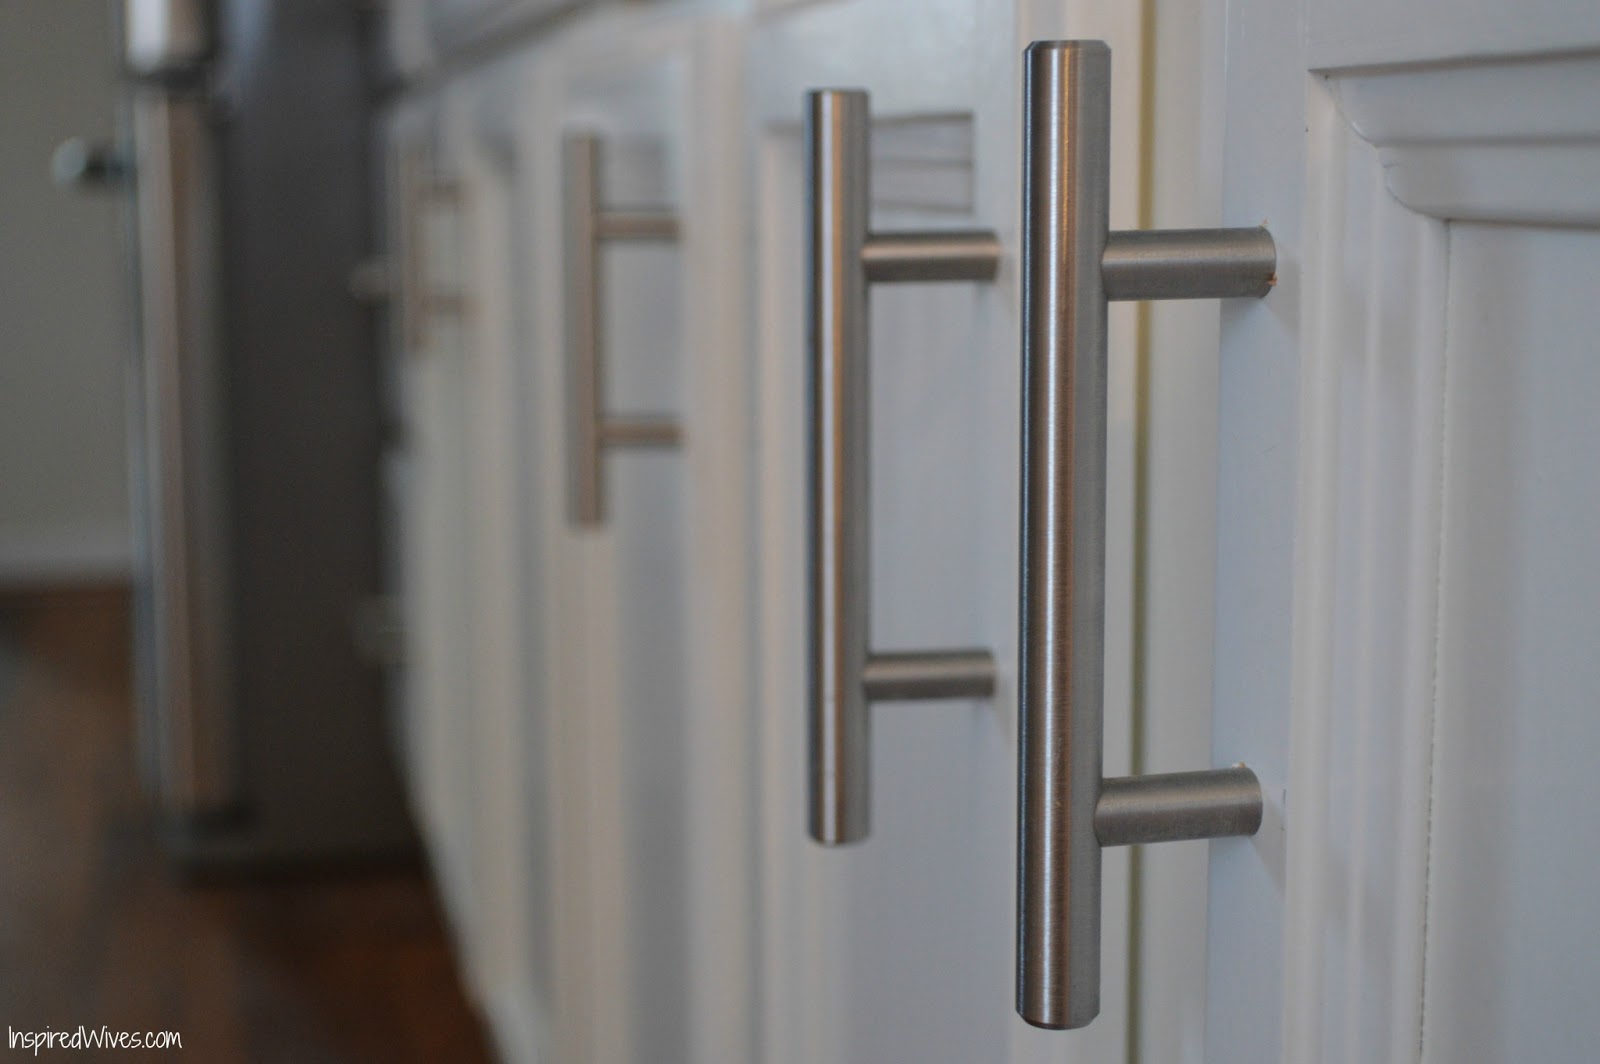 Inspired Wives: Adding Hardware to Kitchen Cabinets